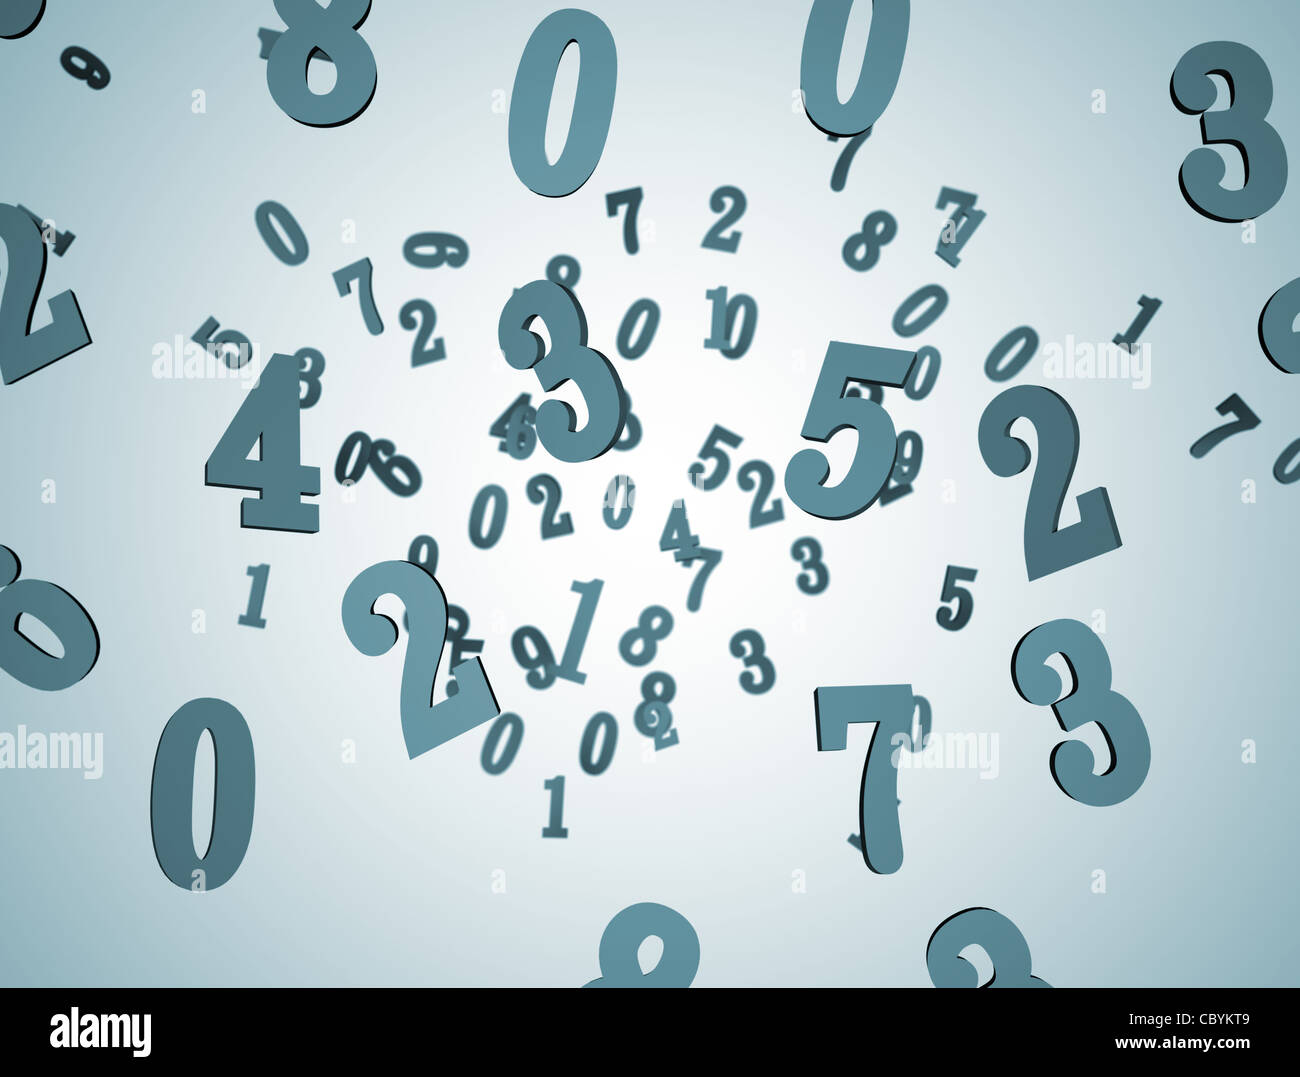 Numbers background 3D Stock Photo